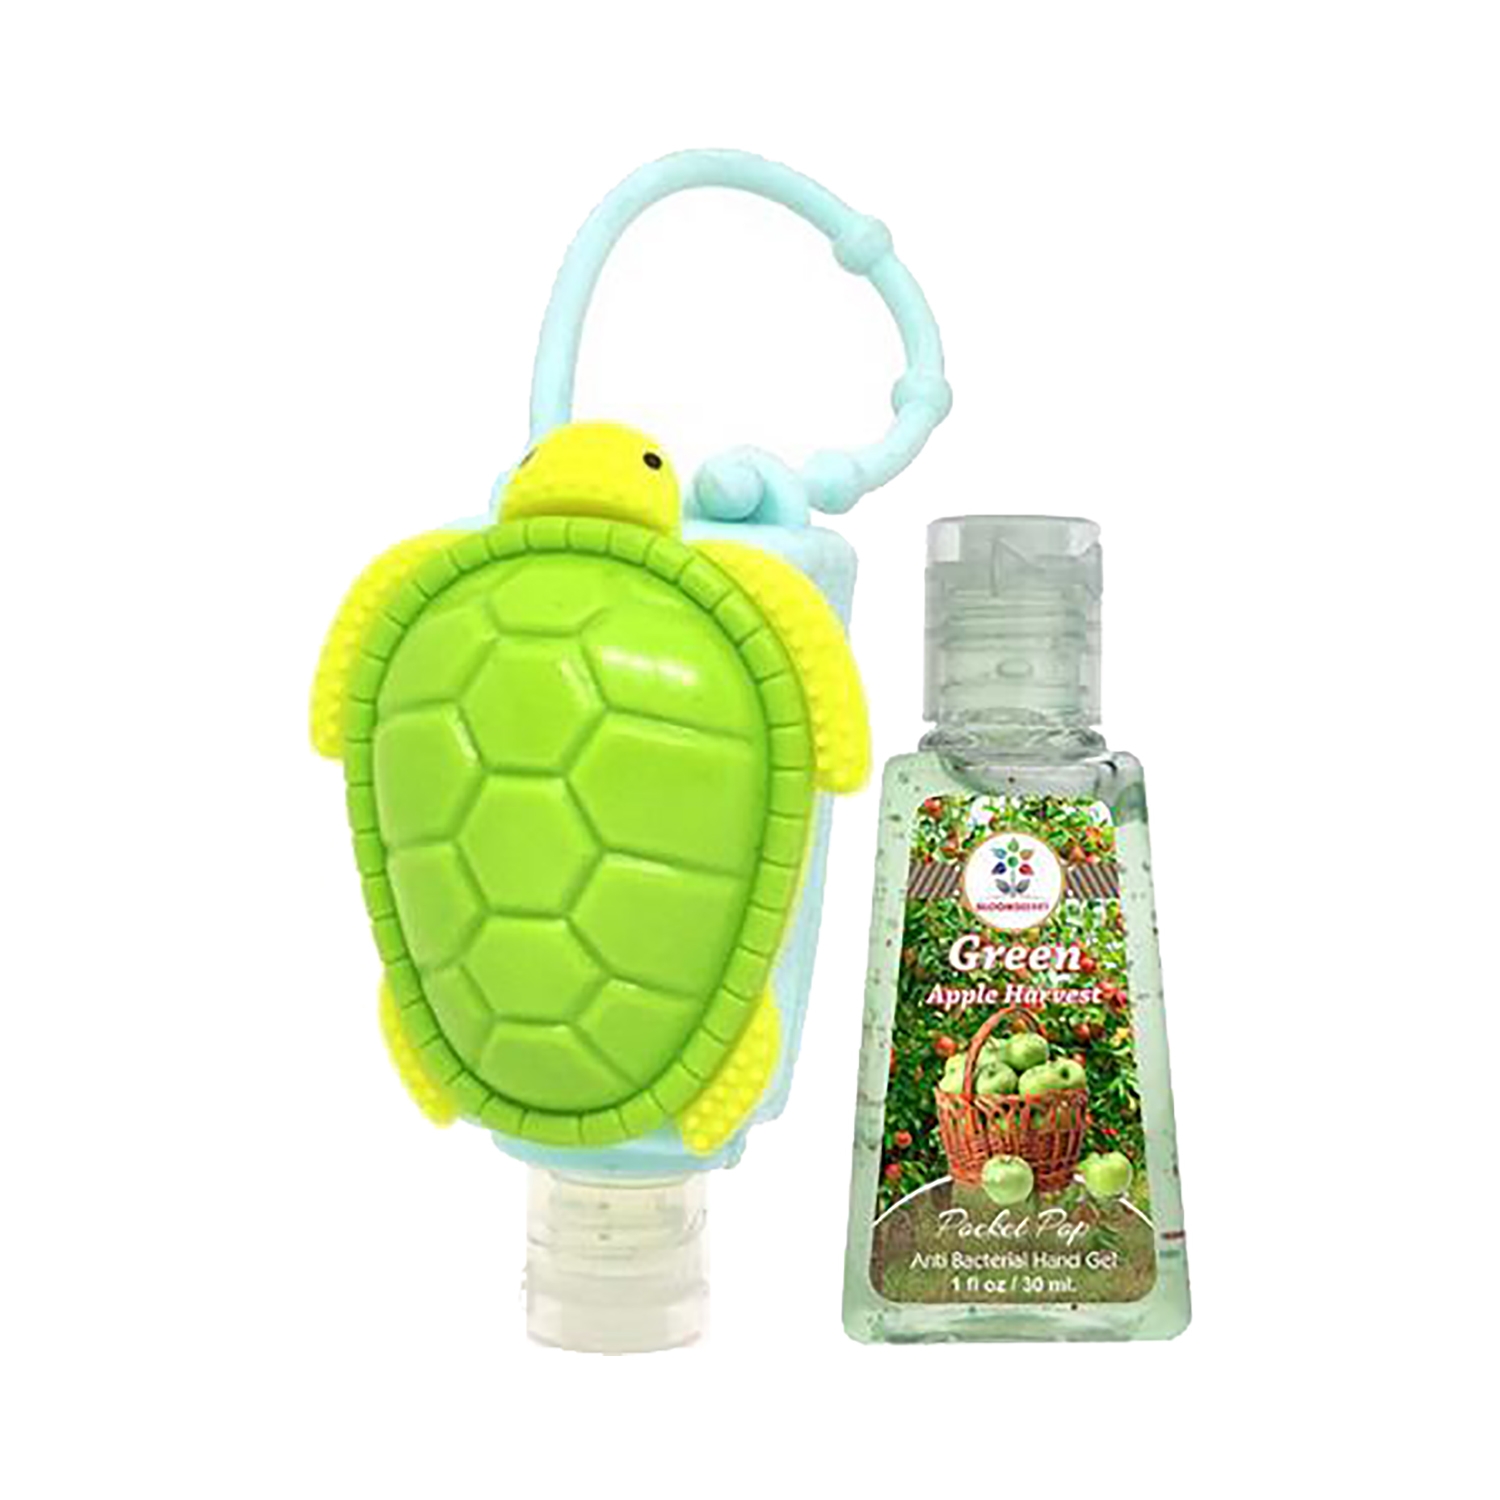 Bloomsberry | Bloomsberry Tortoise Holder With Green Apple Harvest Sanitizer Combo Pack - (2 Pcs)